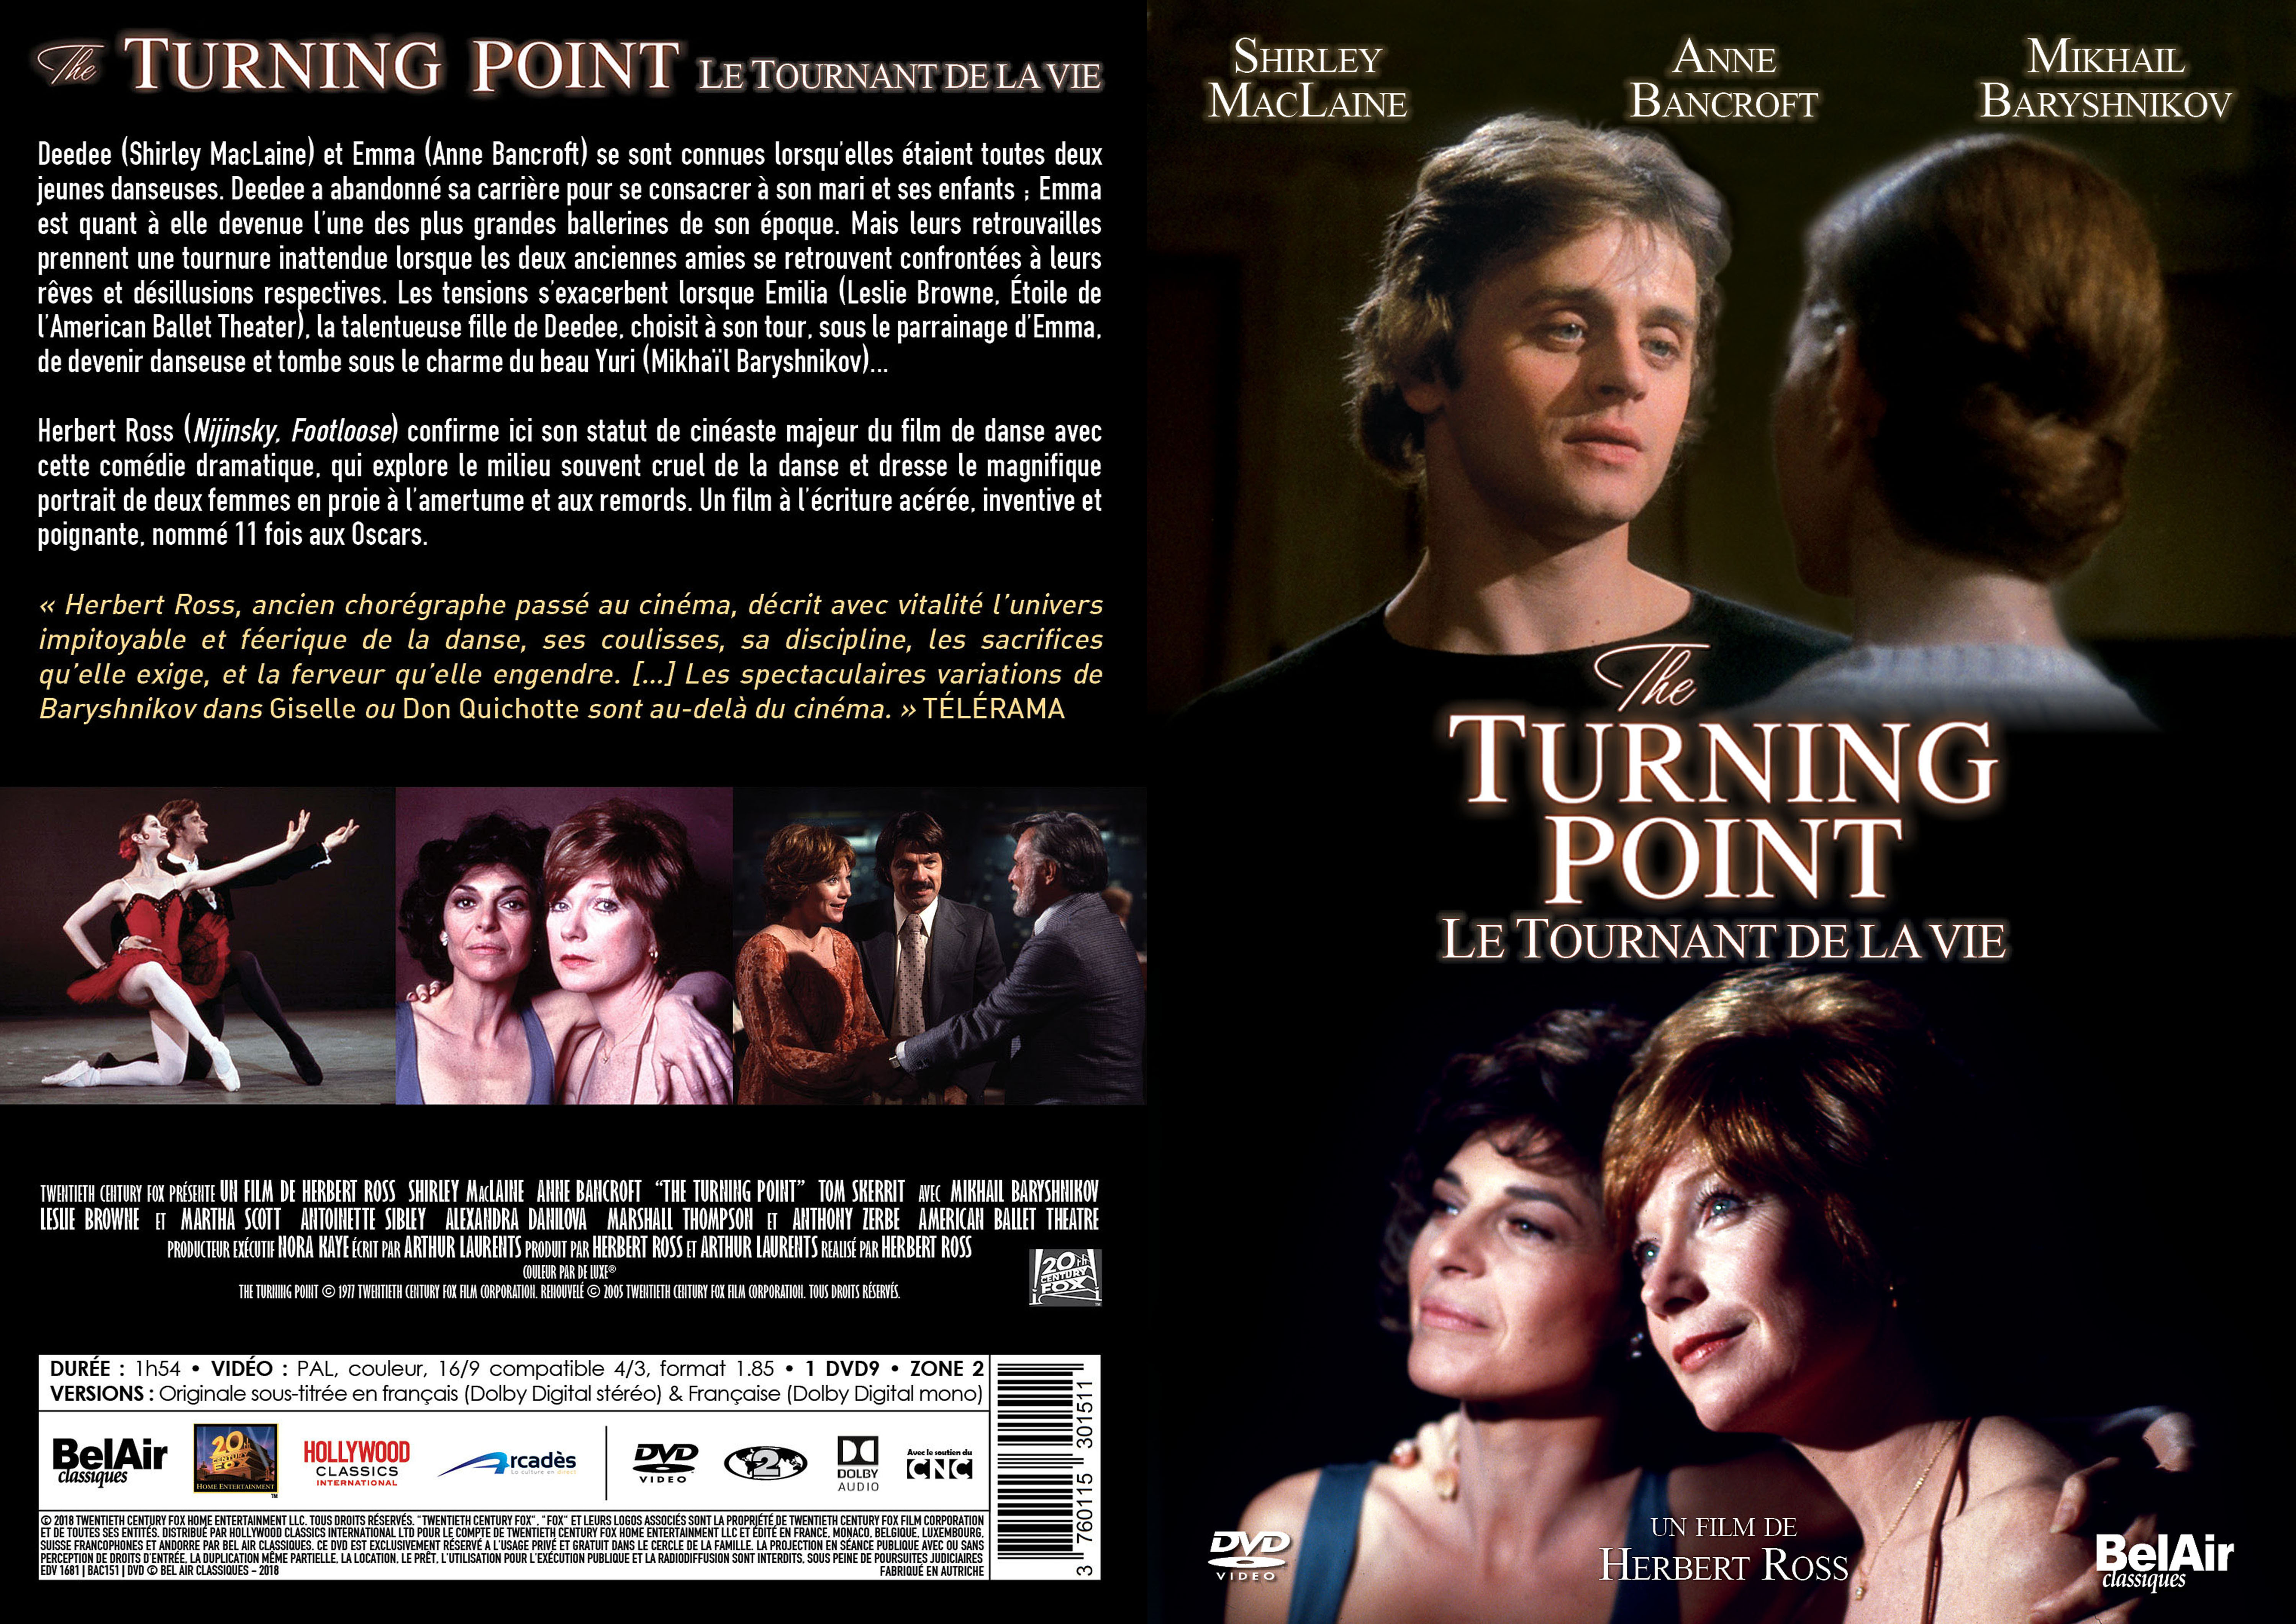 Jaquette DVD The turning point